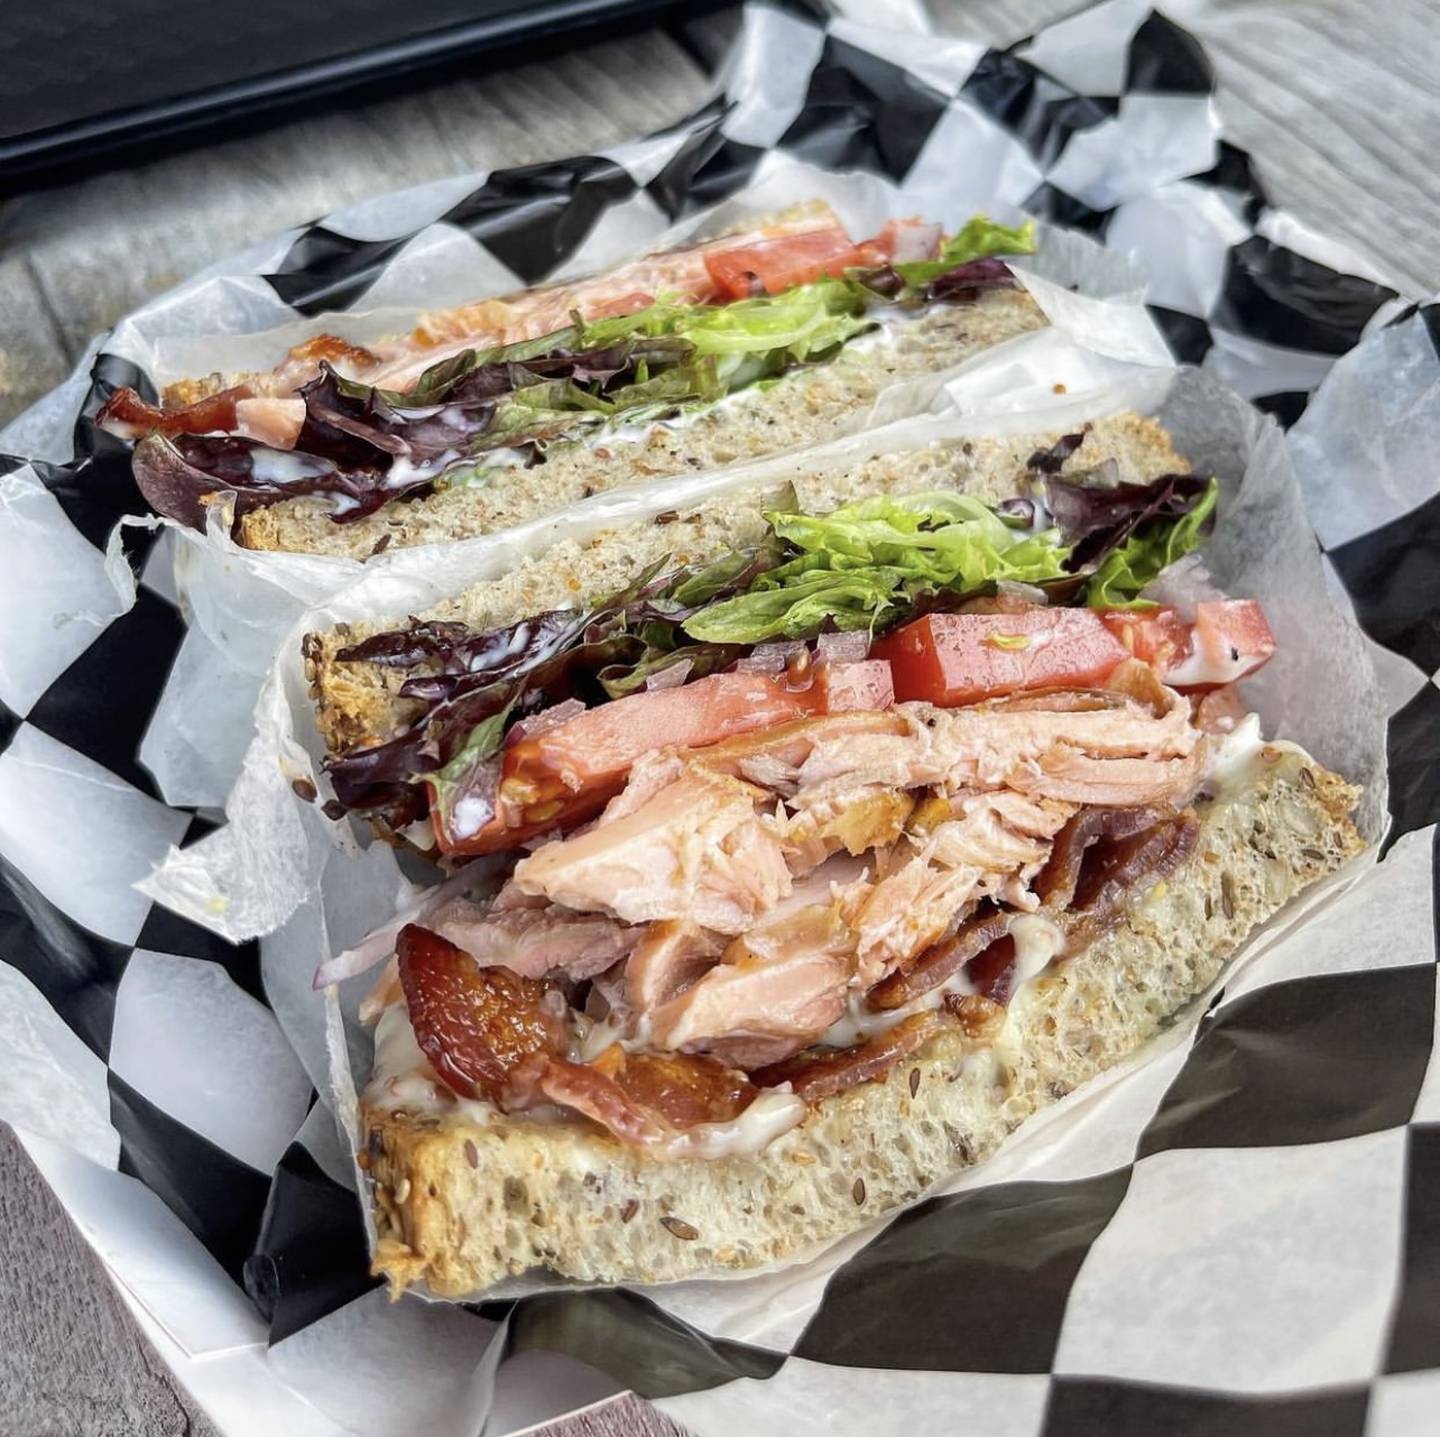 A salmon BLT from Neopol Smokery.